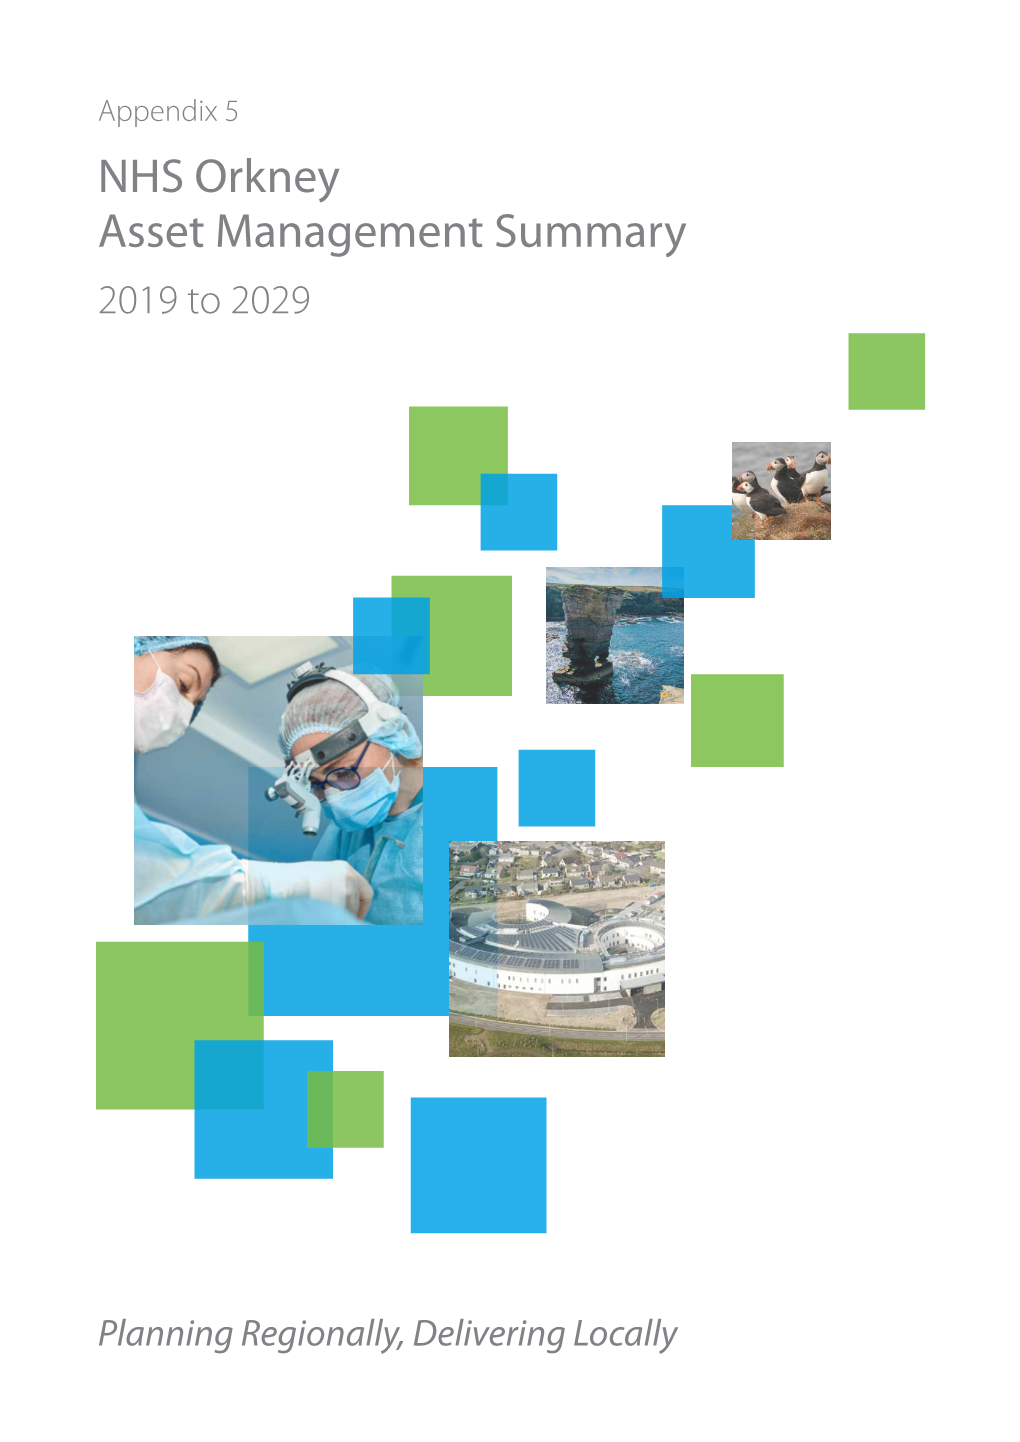 NHS Orkney Asset Management Summary 2019 to 2029